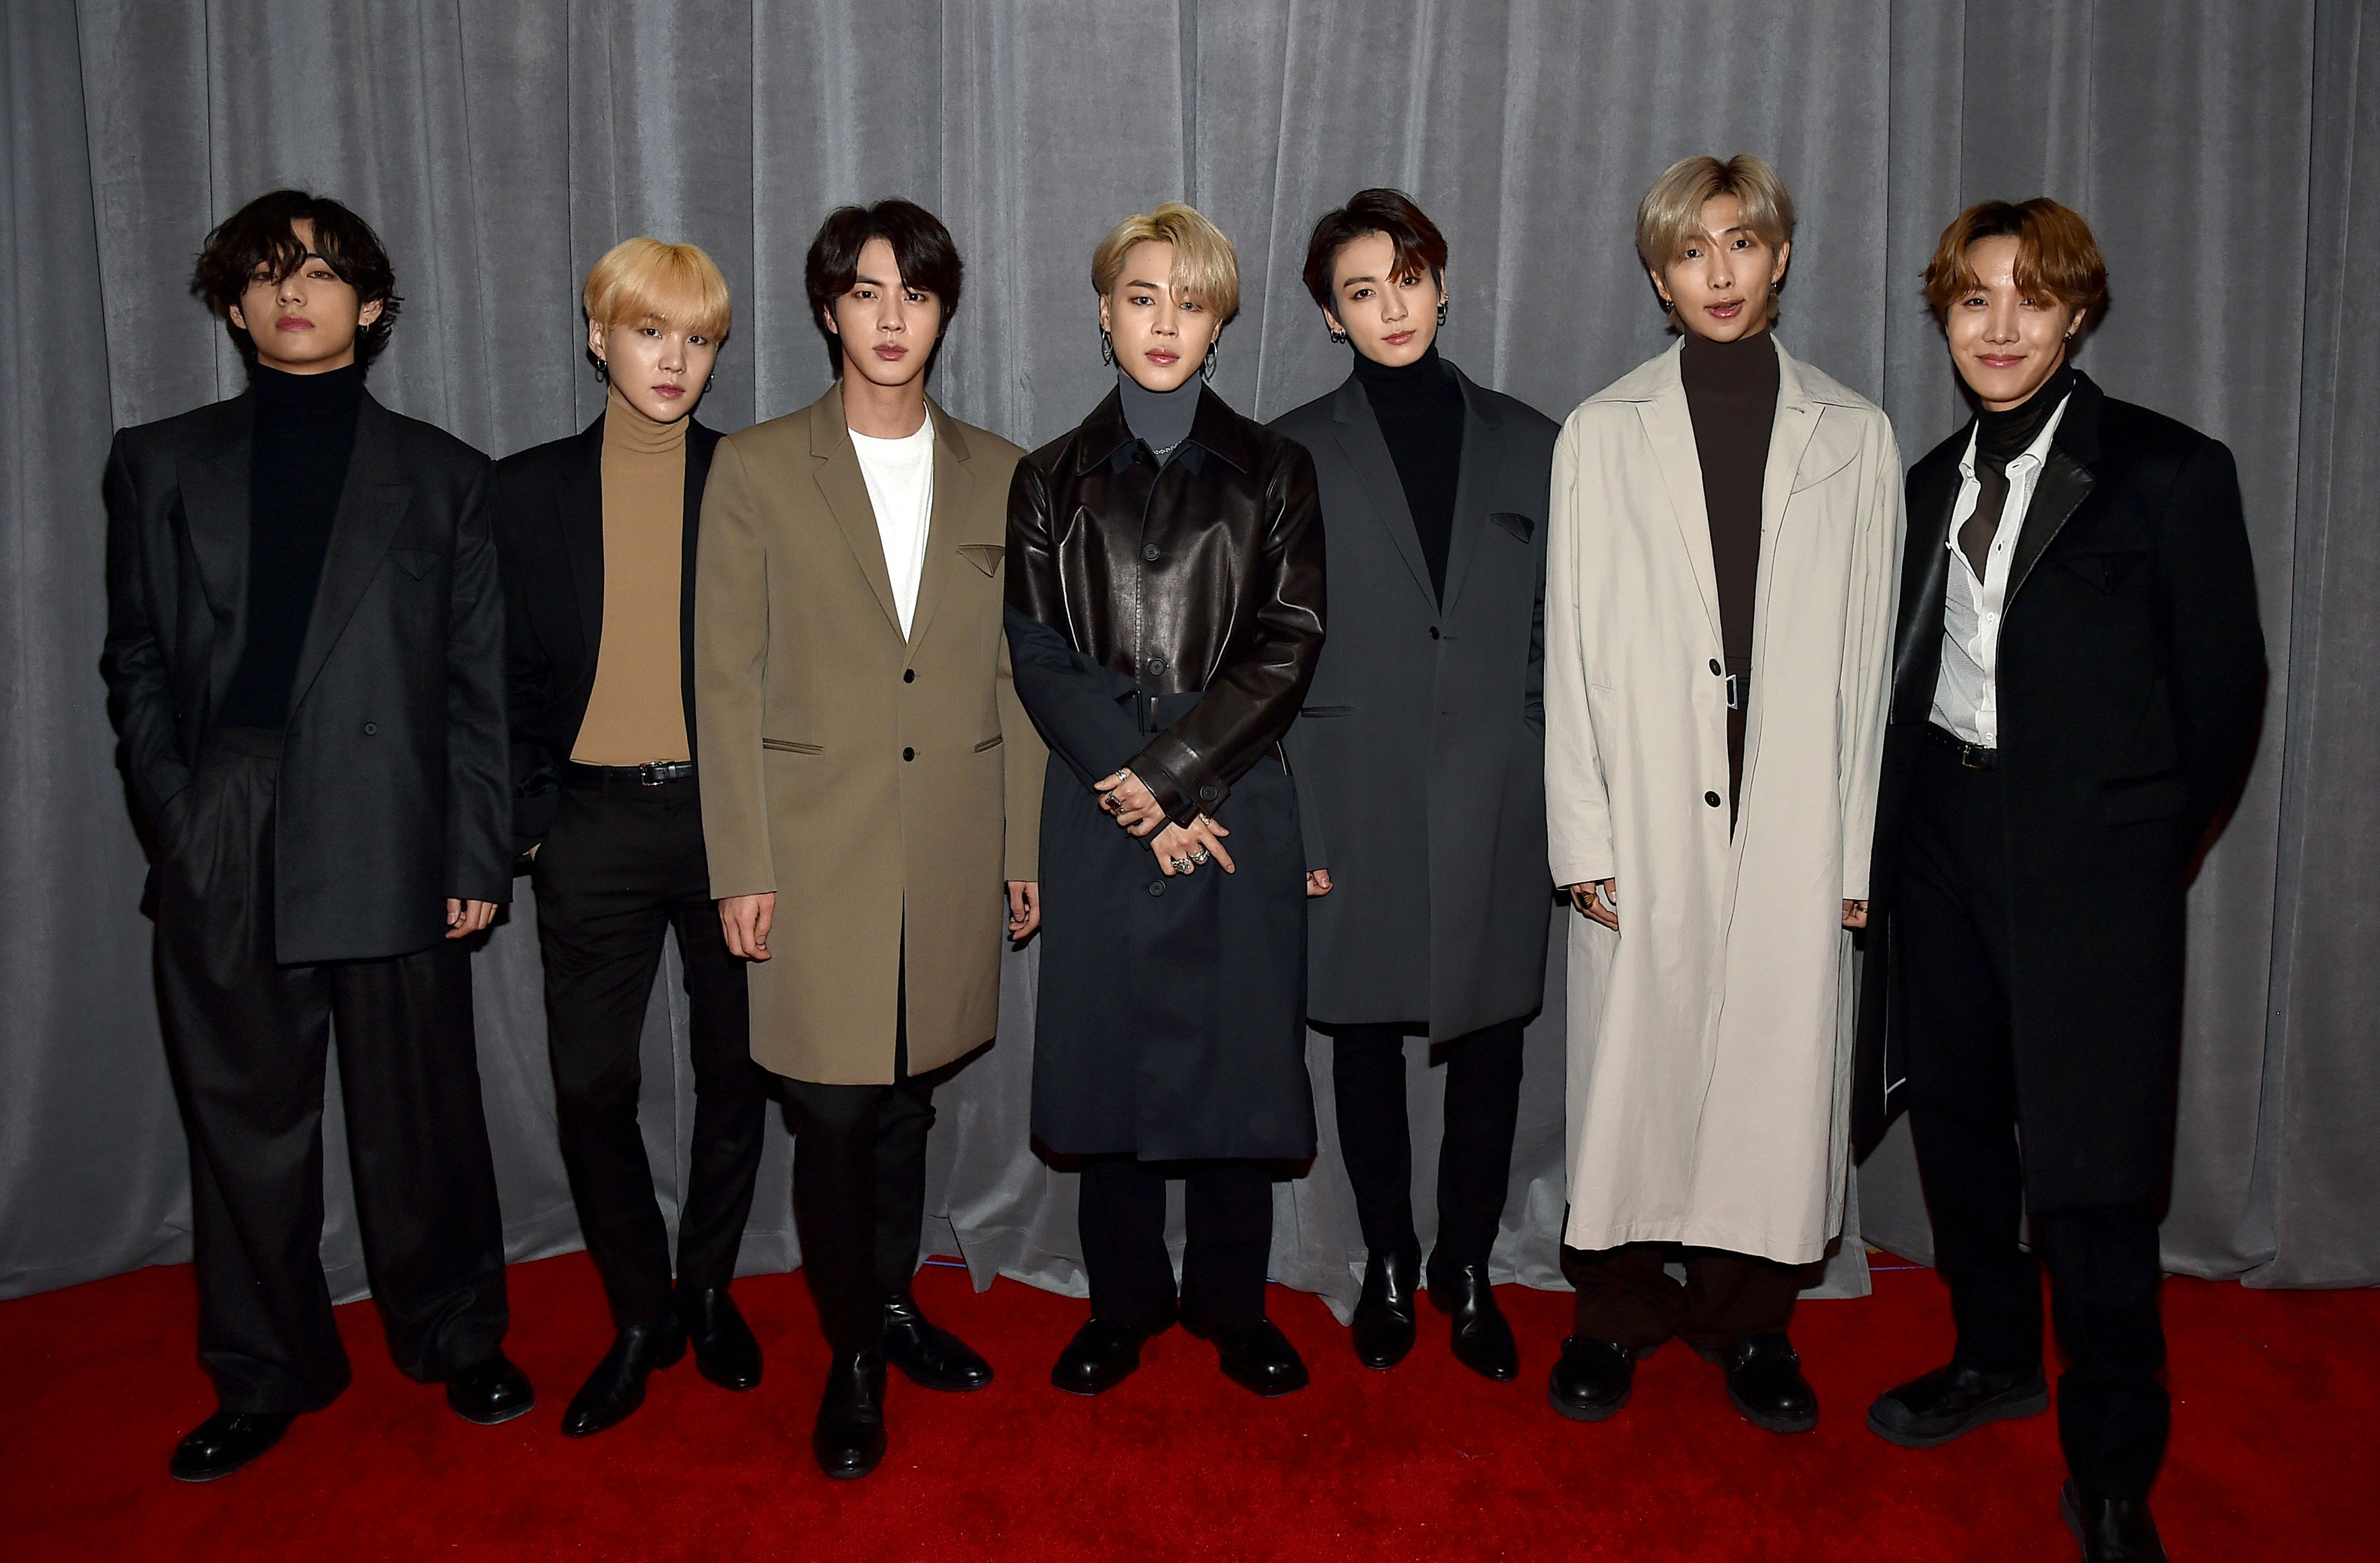 The seven members of K-Pop boyband BTS on the red carpet of the Grammy Awards